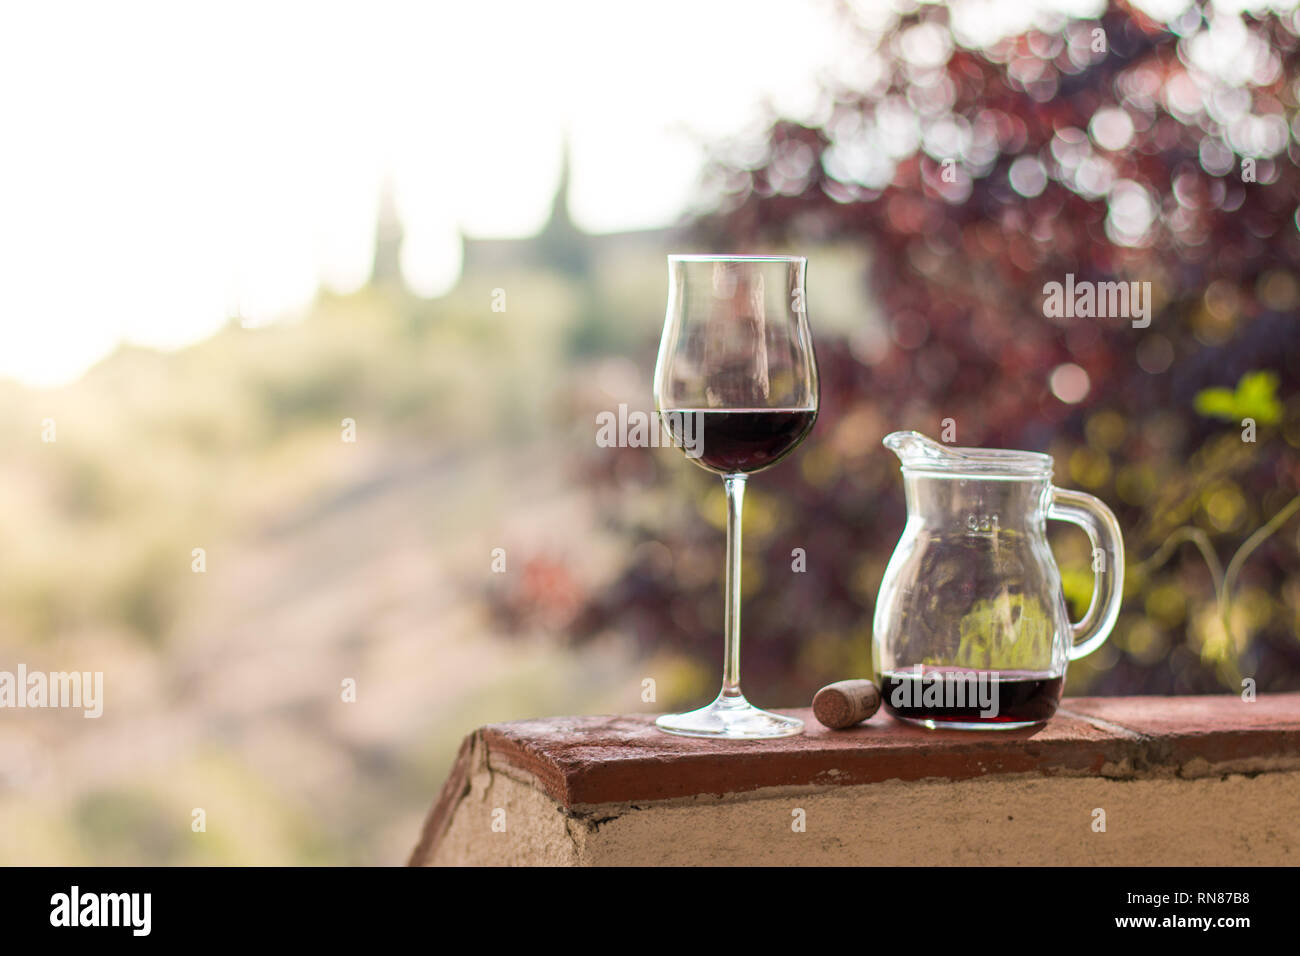 Enjoying a glass of red wine at Tuscany, Italy. Blurry wine yards in the background. Stock Photo